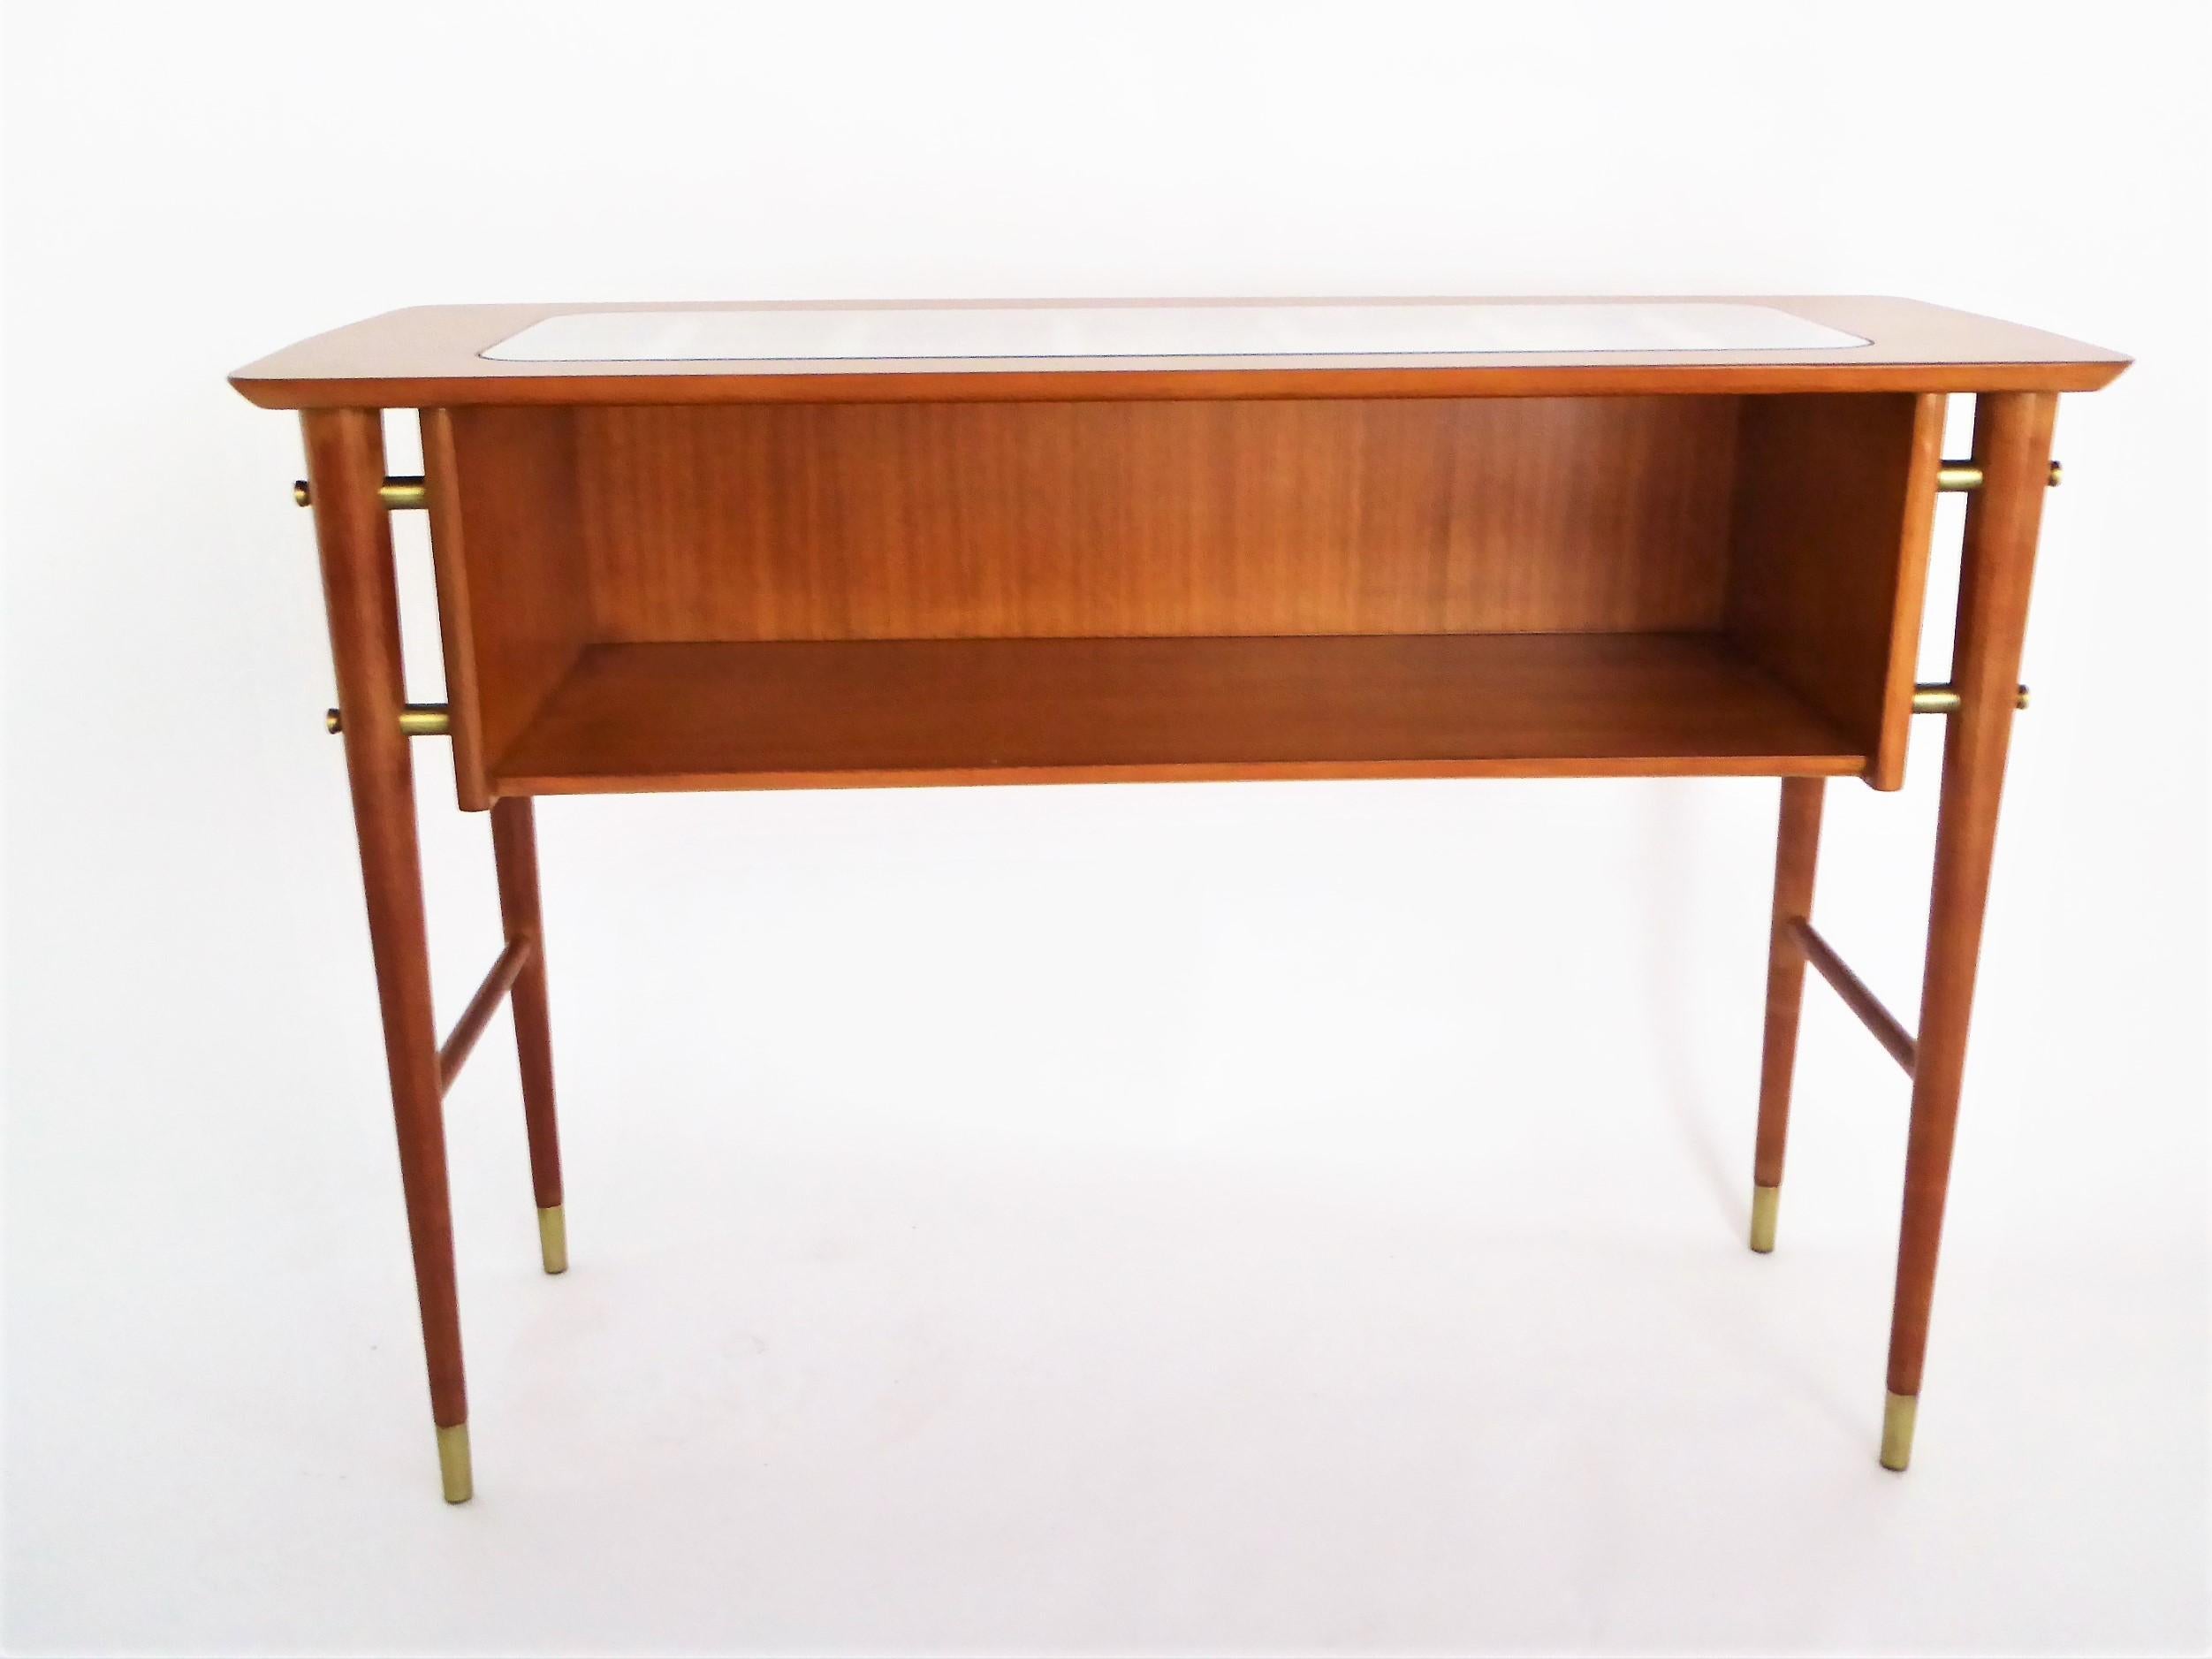 A 1950s Gio Ponti style Petite console table with shelf in blond mahogany with brass sabots and side mounts. Featuring an inset glass on top with slat supports and stylized screw-top wood inlays. Restored finish with original glass with minor age